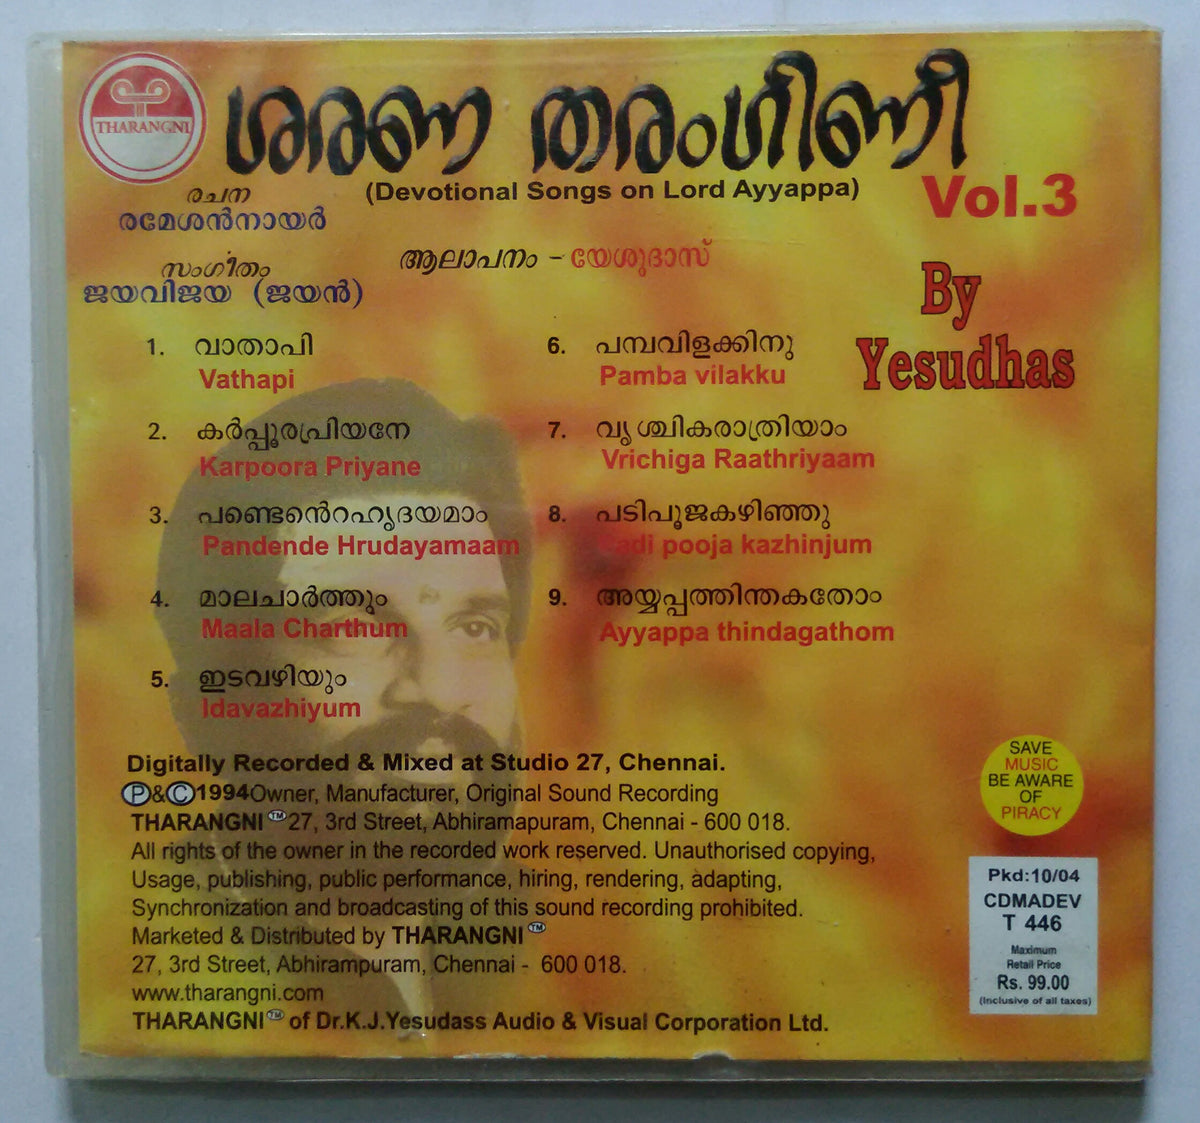 WORK Lord Ayyappa Songs By Yesudas In Tamil Download Movie